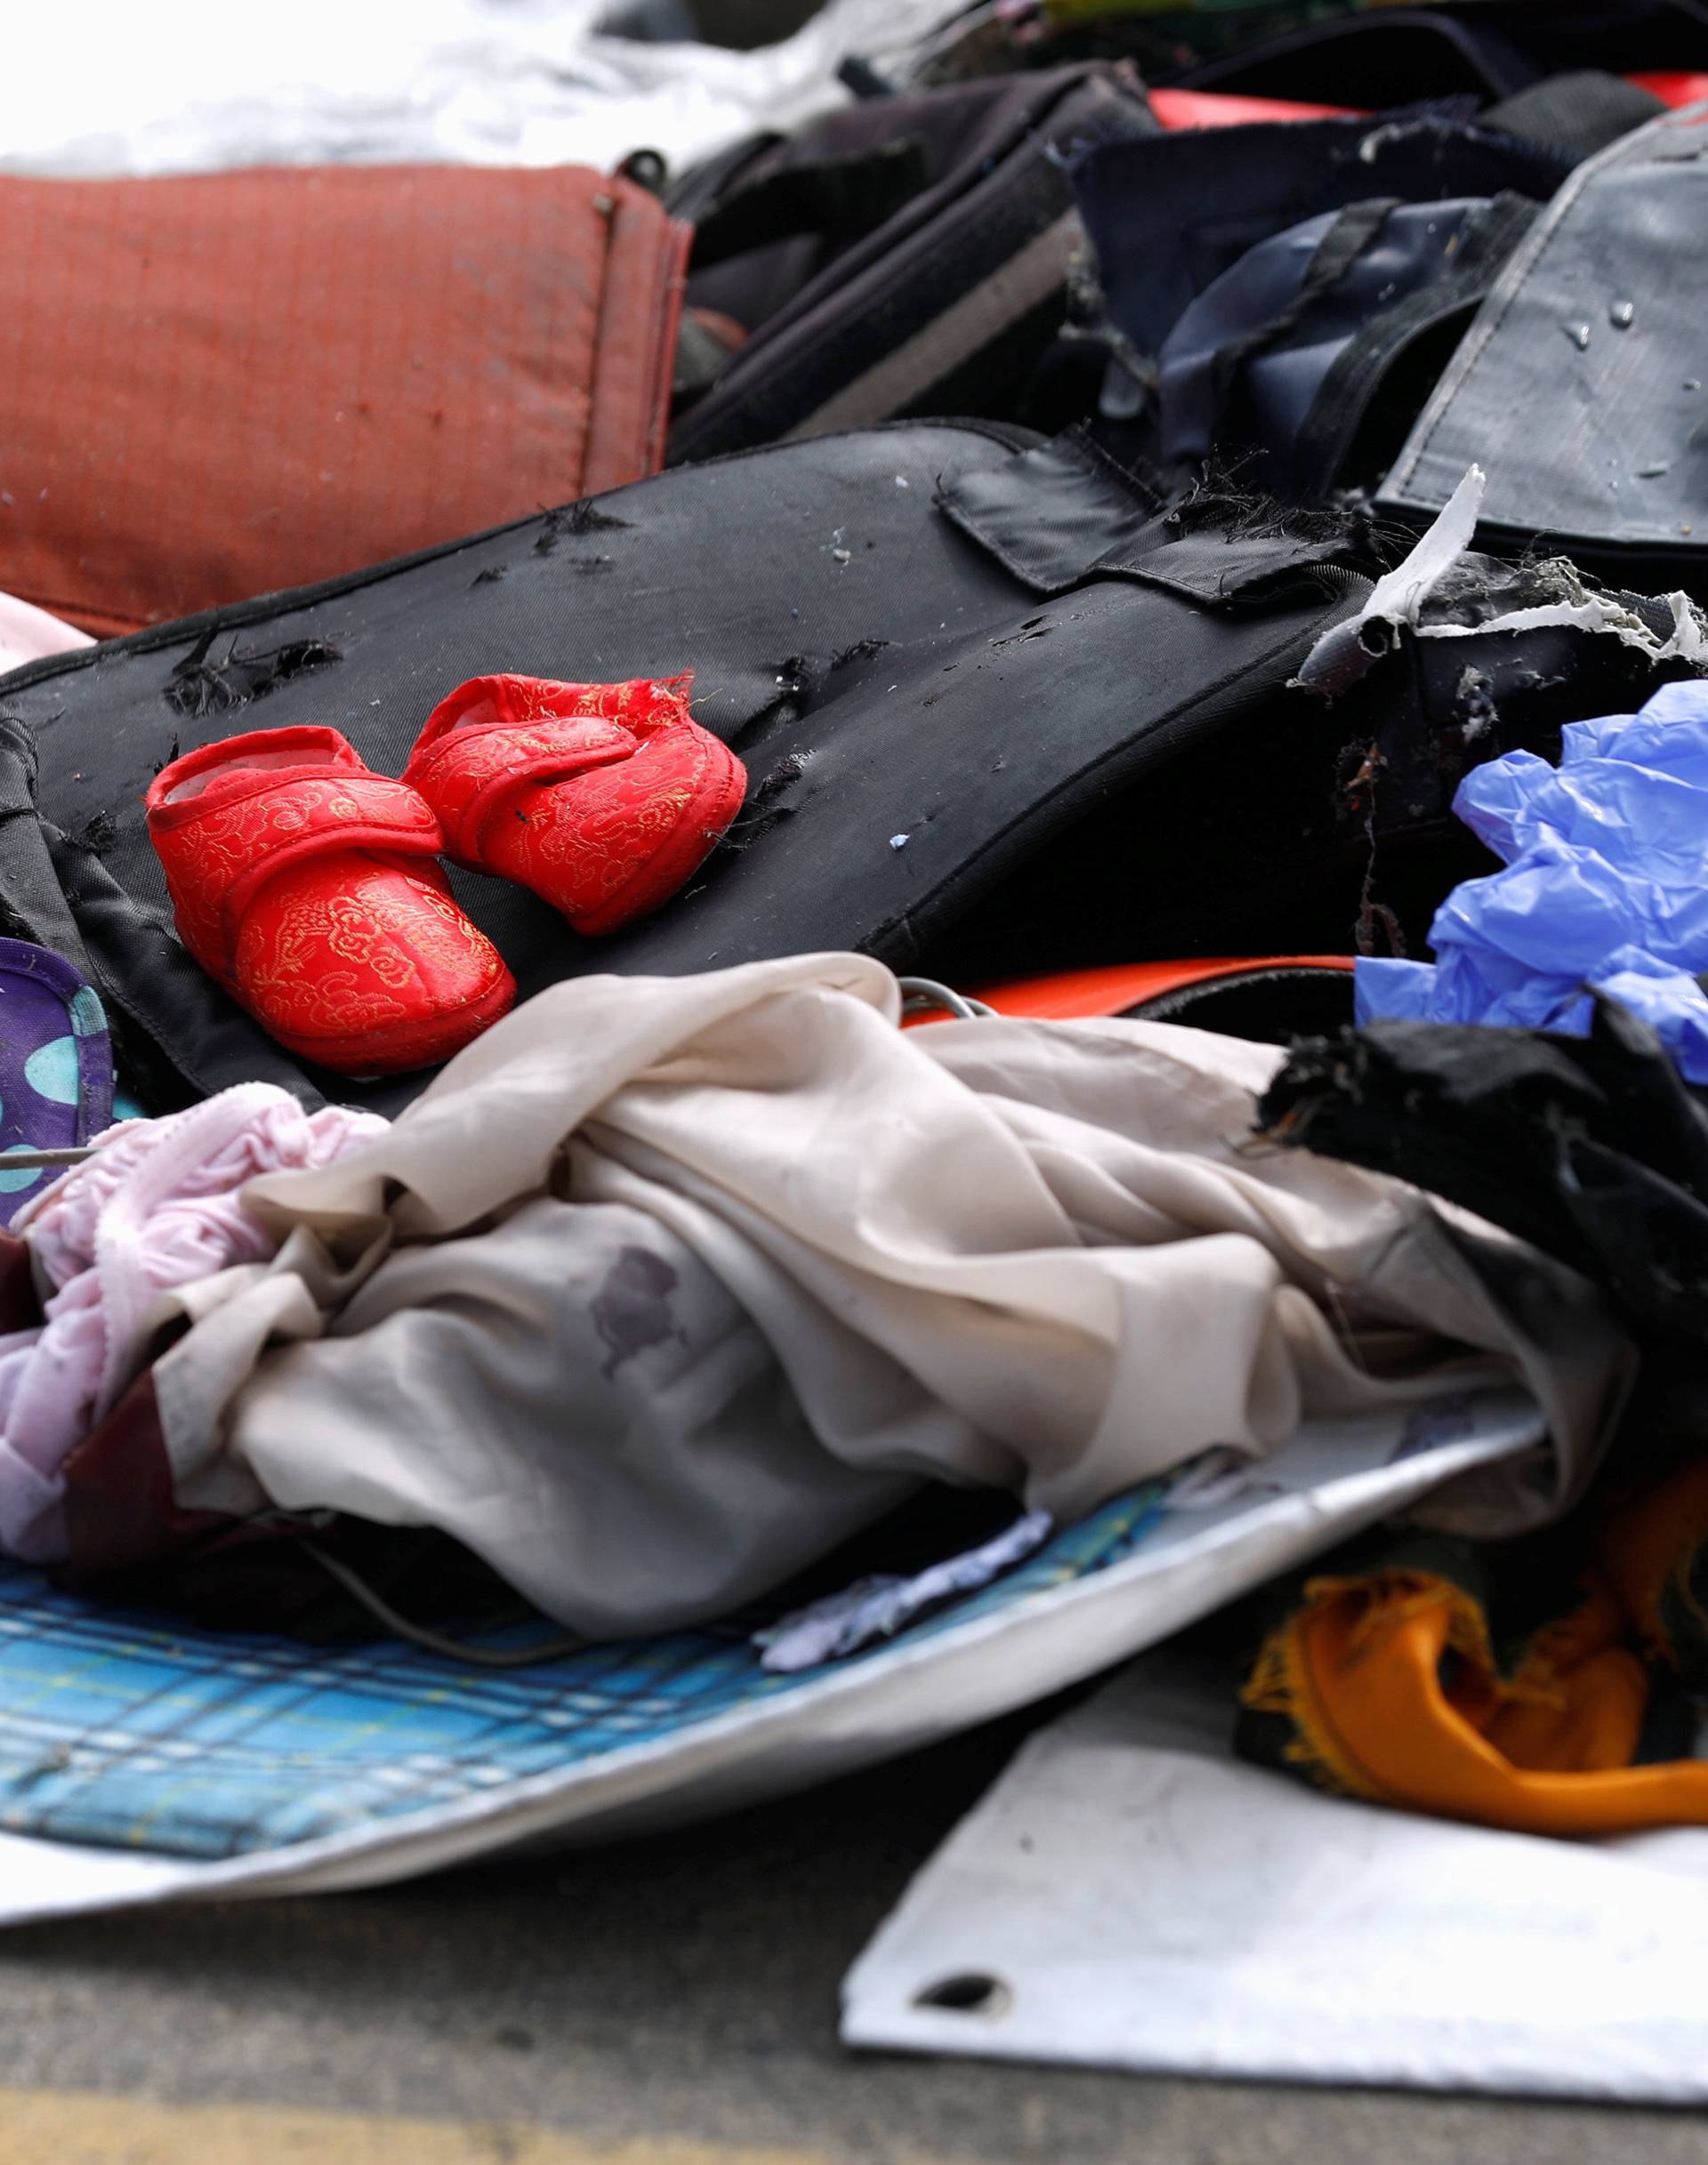 A pair of infant shoes is pictured among recovered belongings believed to be from the crashed Lion Air flight JT610 at Tanjung Priok port in Jakarta